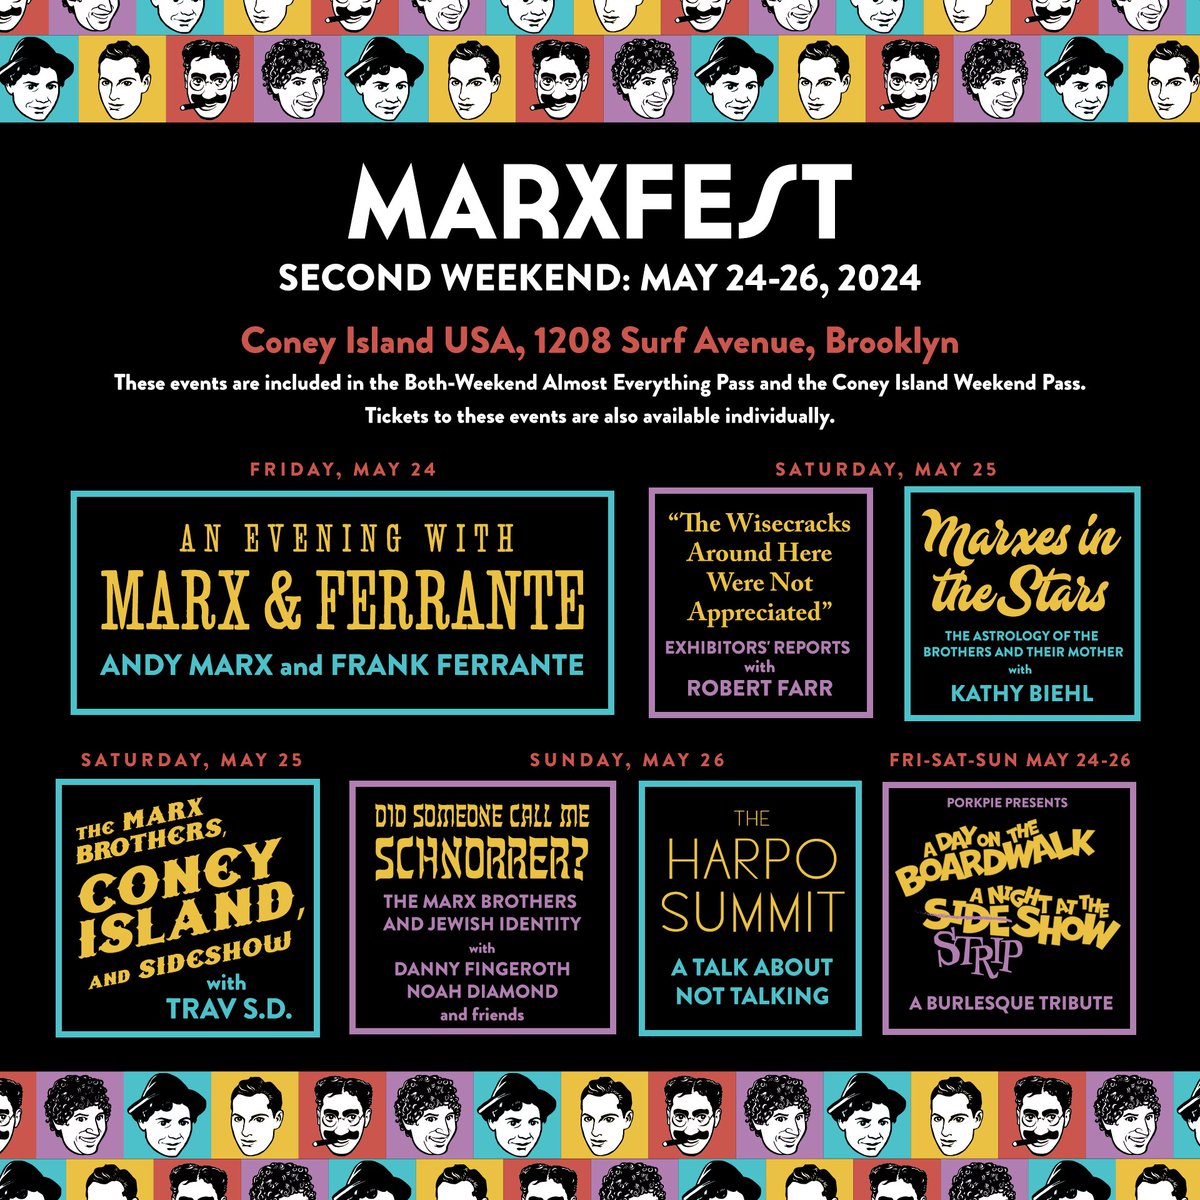 SCHEDULE OF MARXFEST 2024 EVENTS Here it is, friends -- the entire festival! Almost. ⭐️Schedule: marxfest.org/schedule ⭐️Ticket info: marxfest.org/tickets Tickets available first week in April. Join the mailing list at marxfest.org to be notified early! 🥸🎩🎹👔